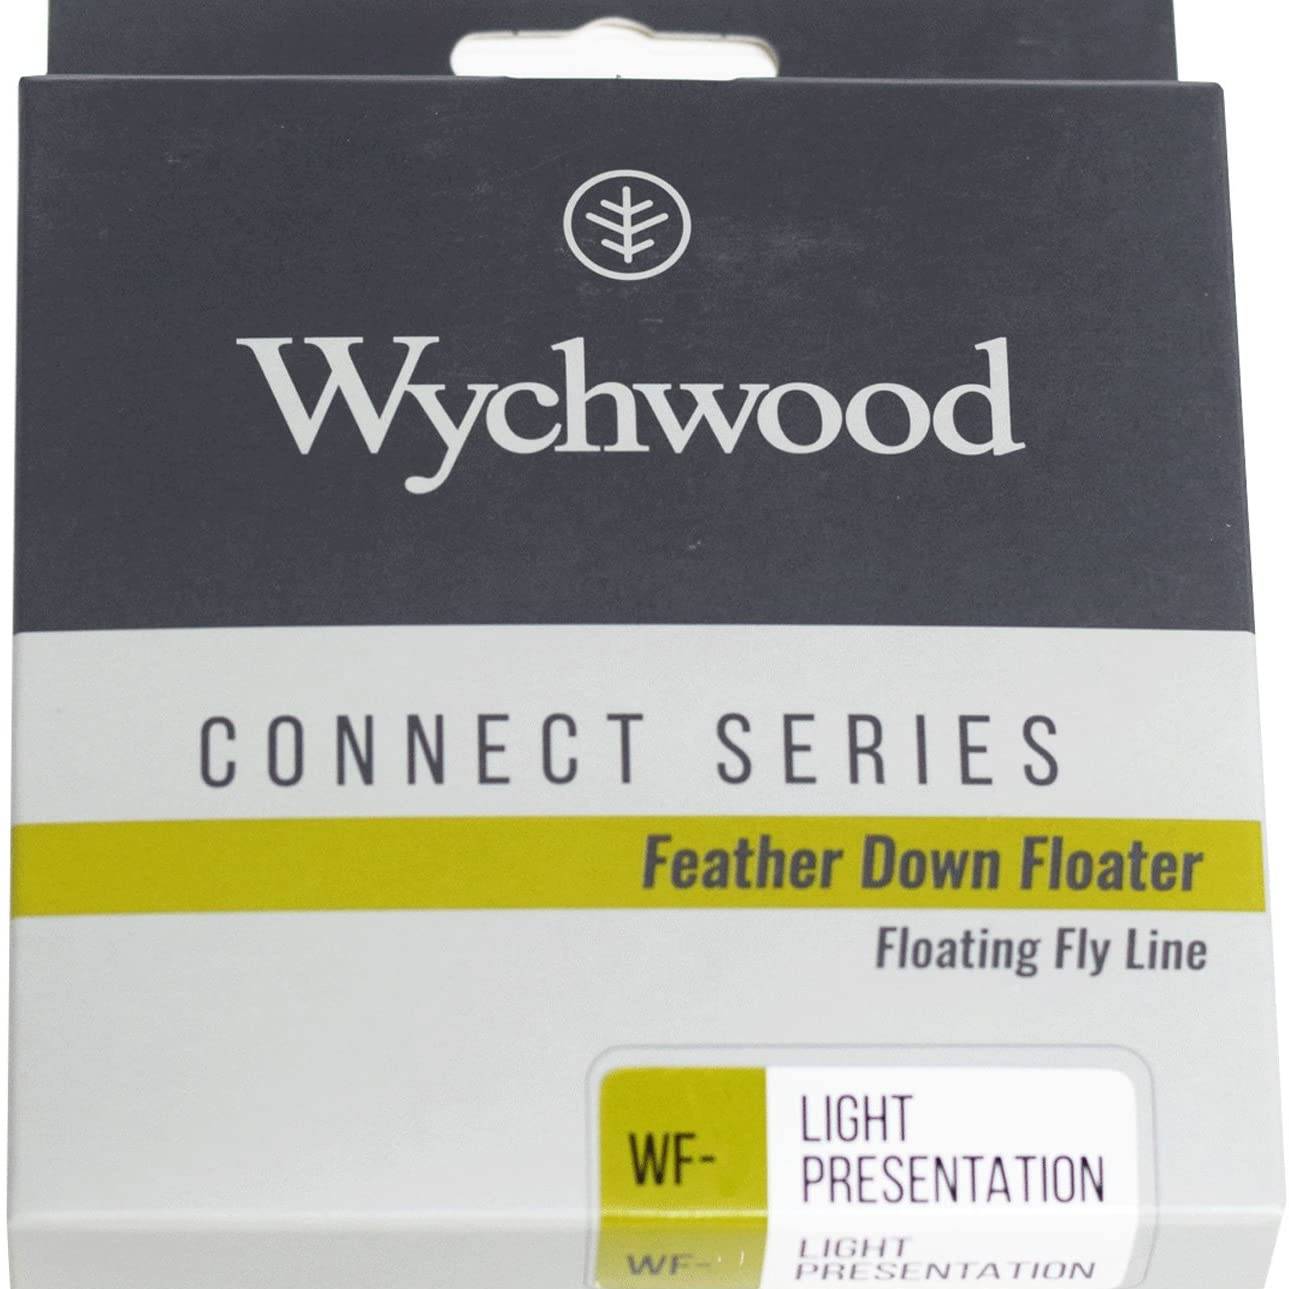 Feather Down Floater Fly Line WF6